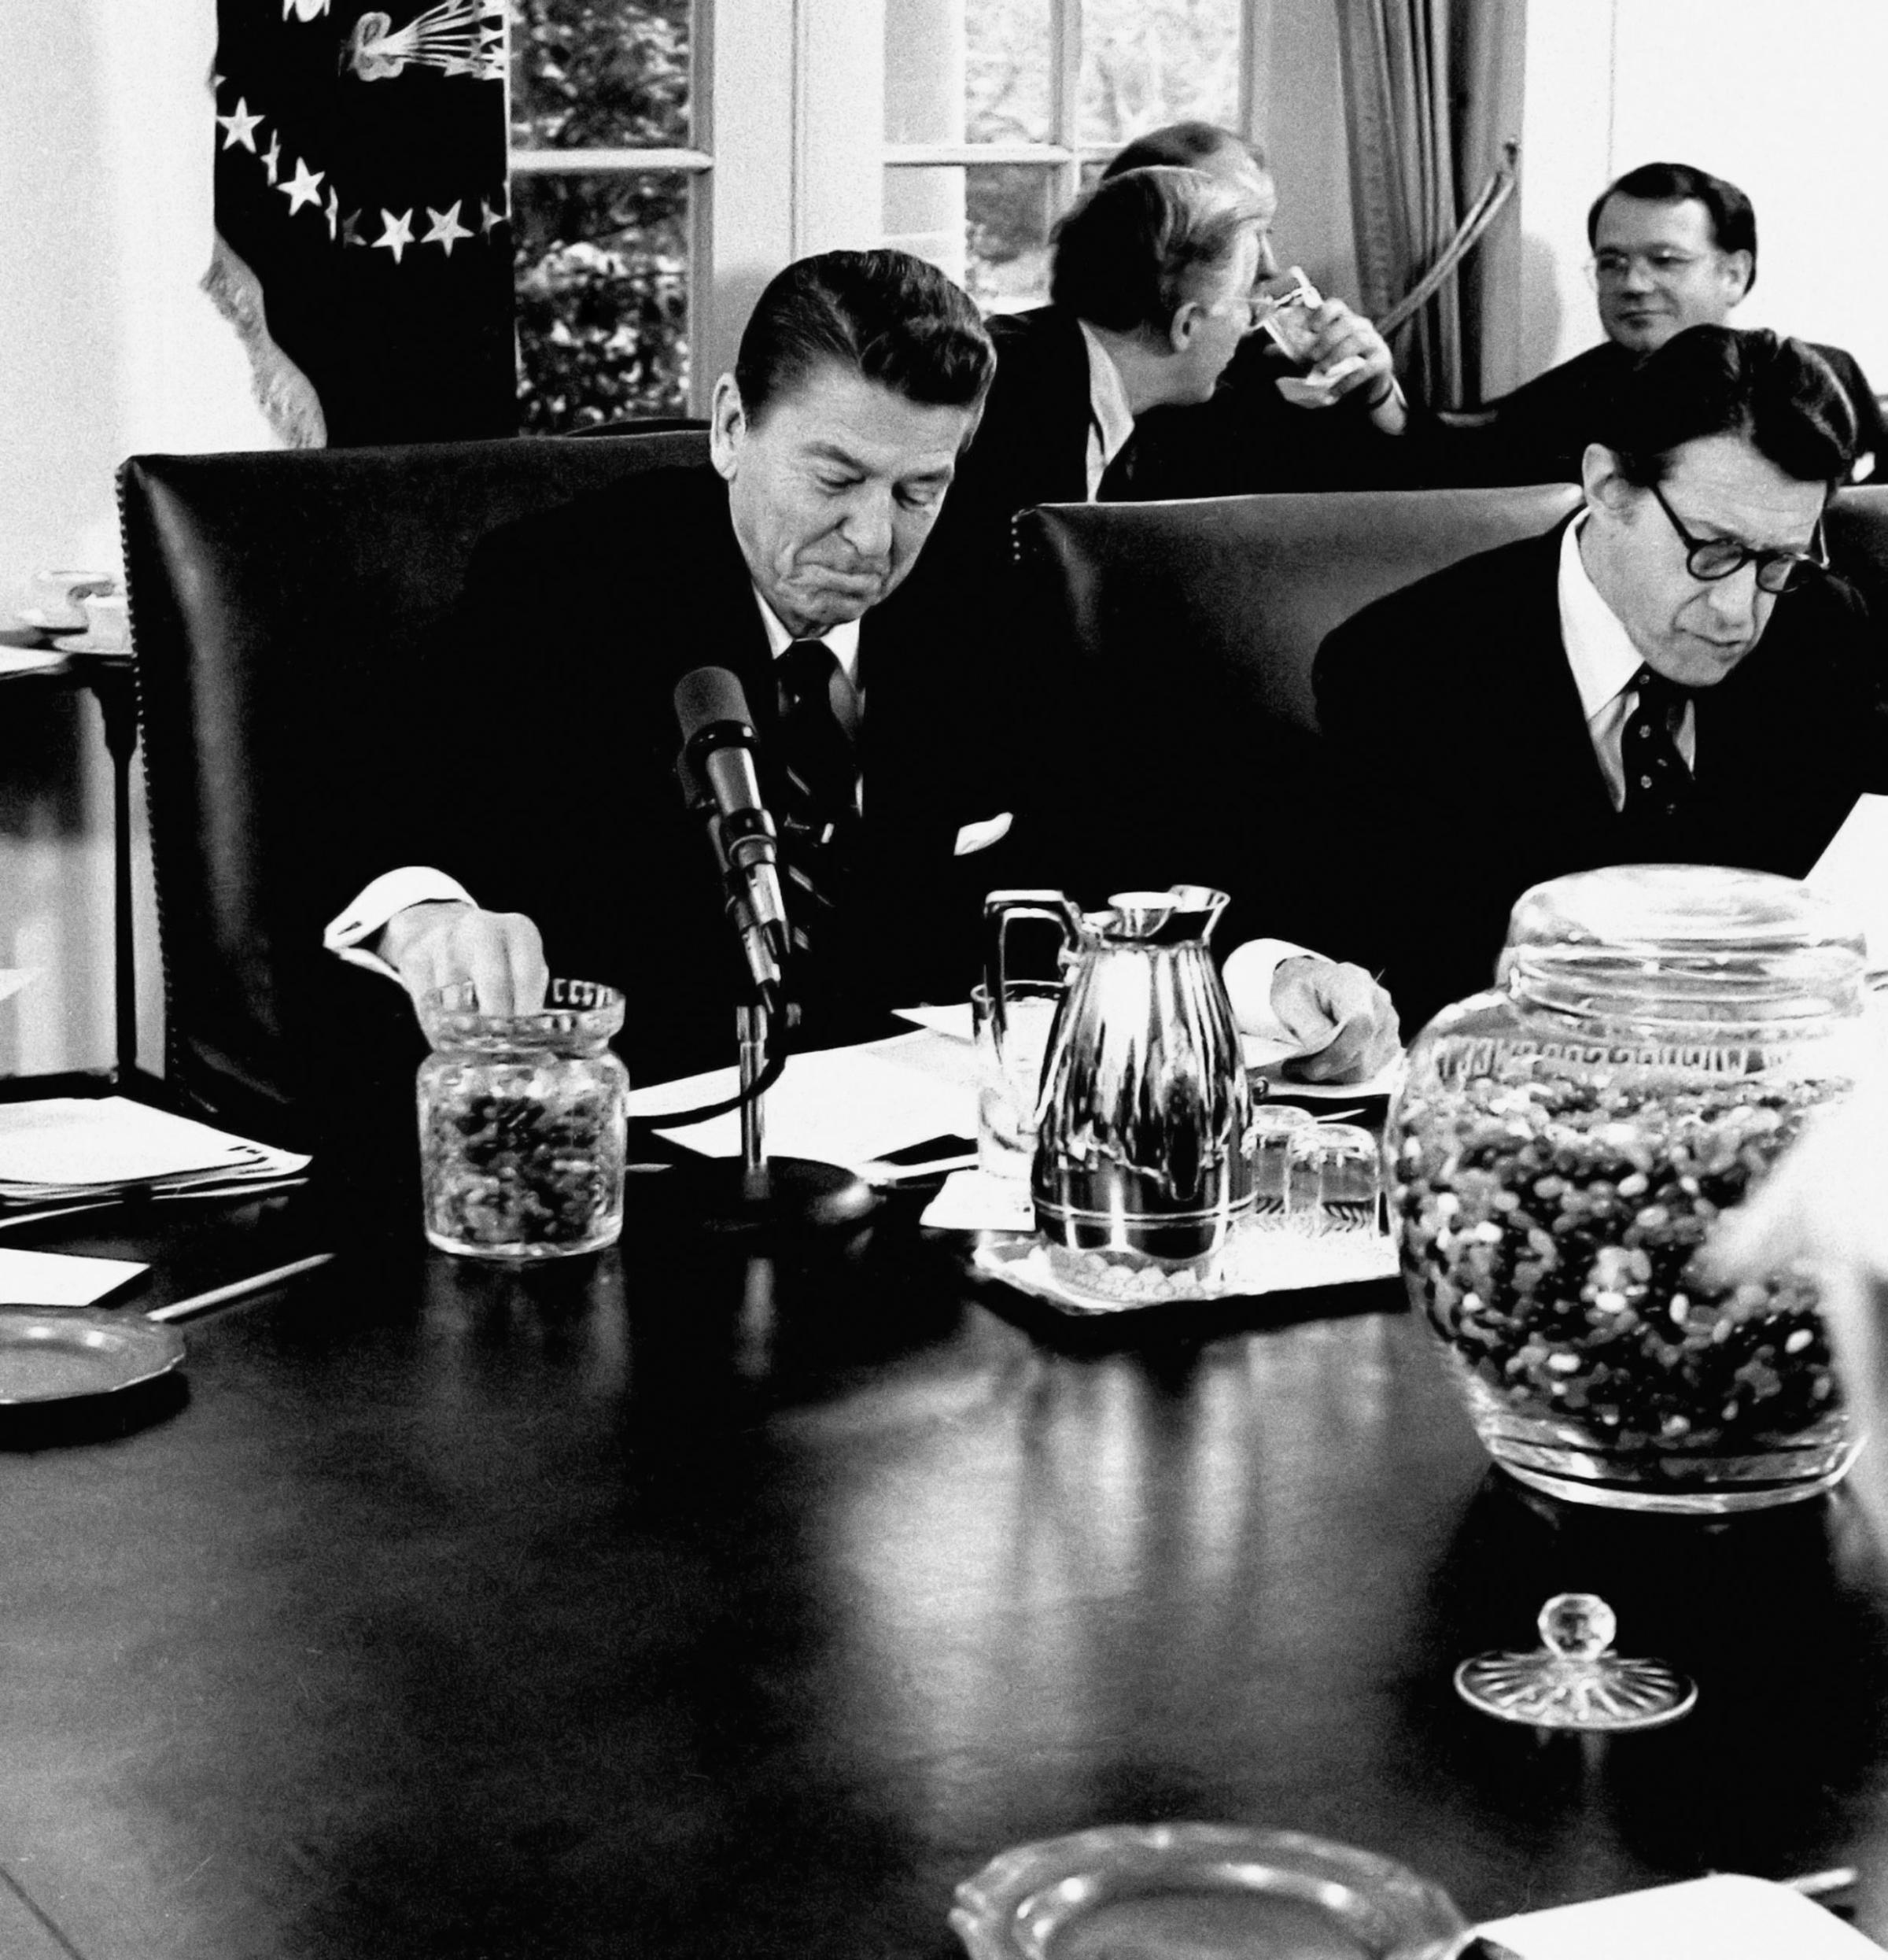 Ronald Reagan eating jelly beans during a meeting on December 13, 2007